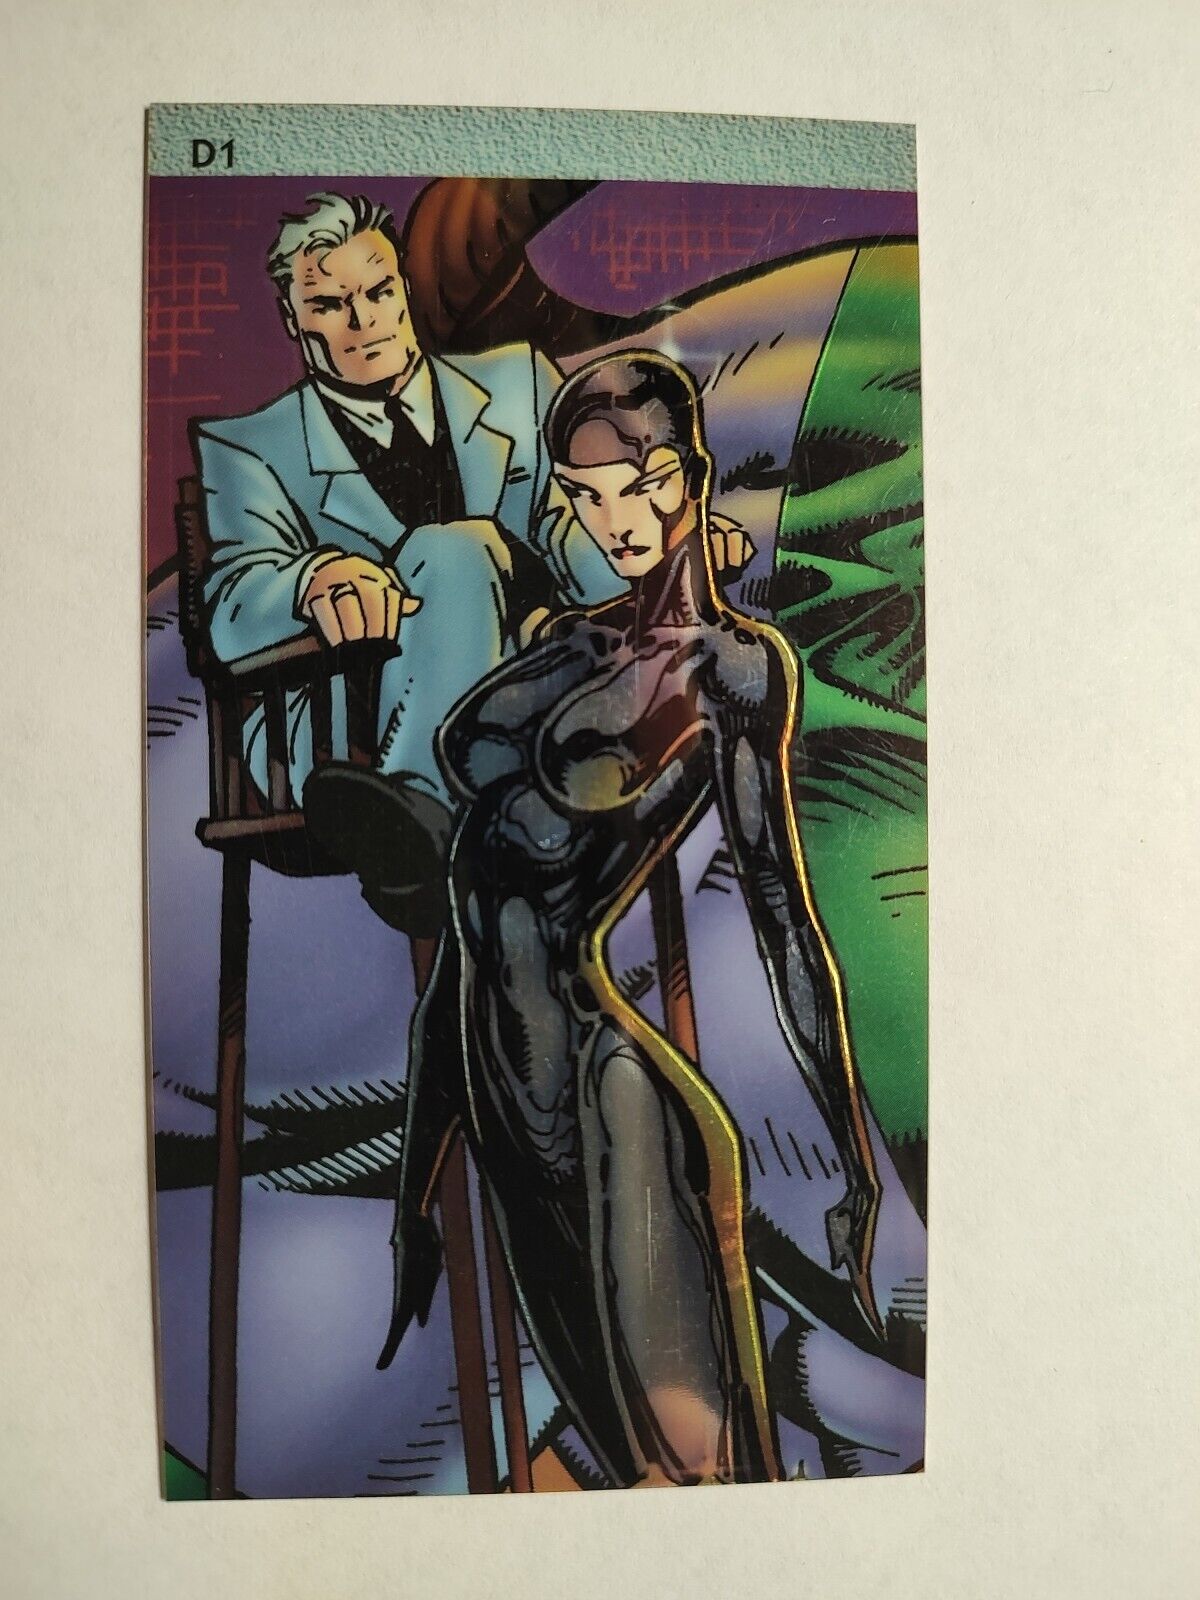 WILDCATS WIDEVISION 1994 WILDSTORM DOUBLE SIDED CHROMIUM CARD D1 UNCIRCULATED